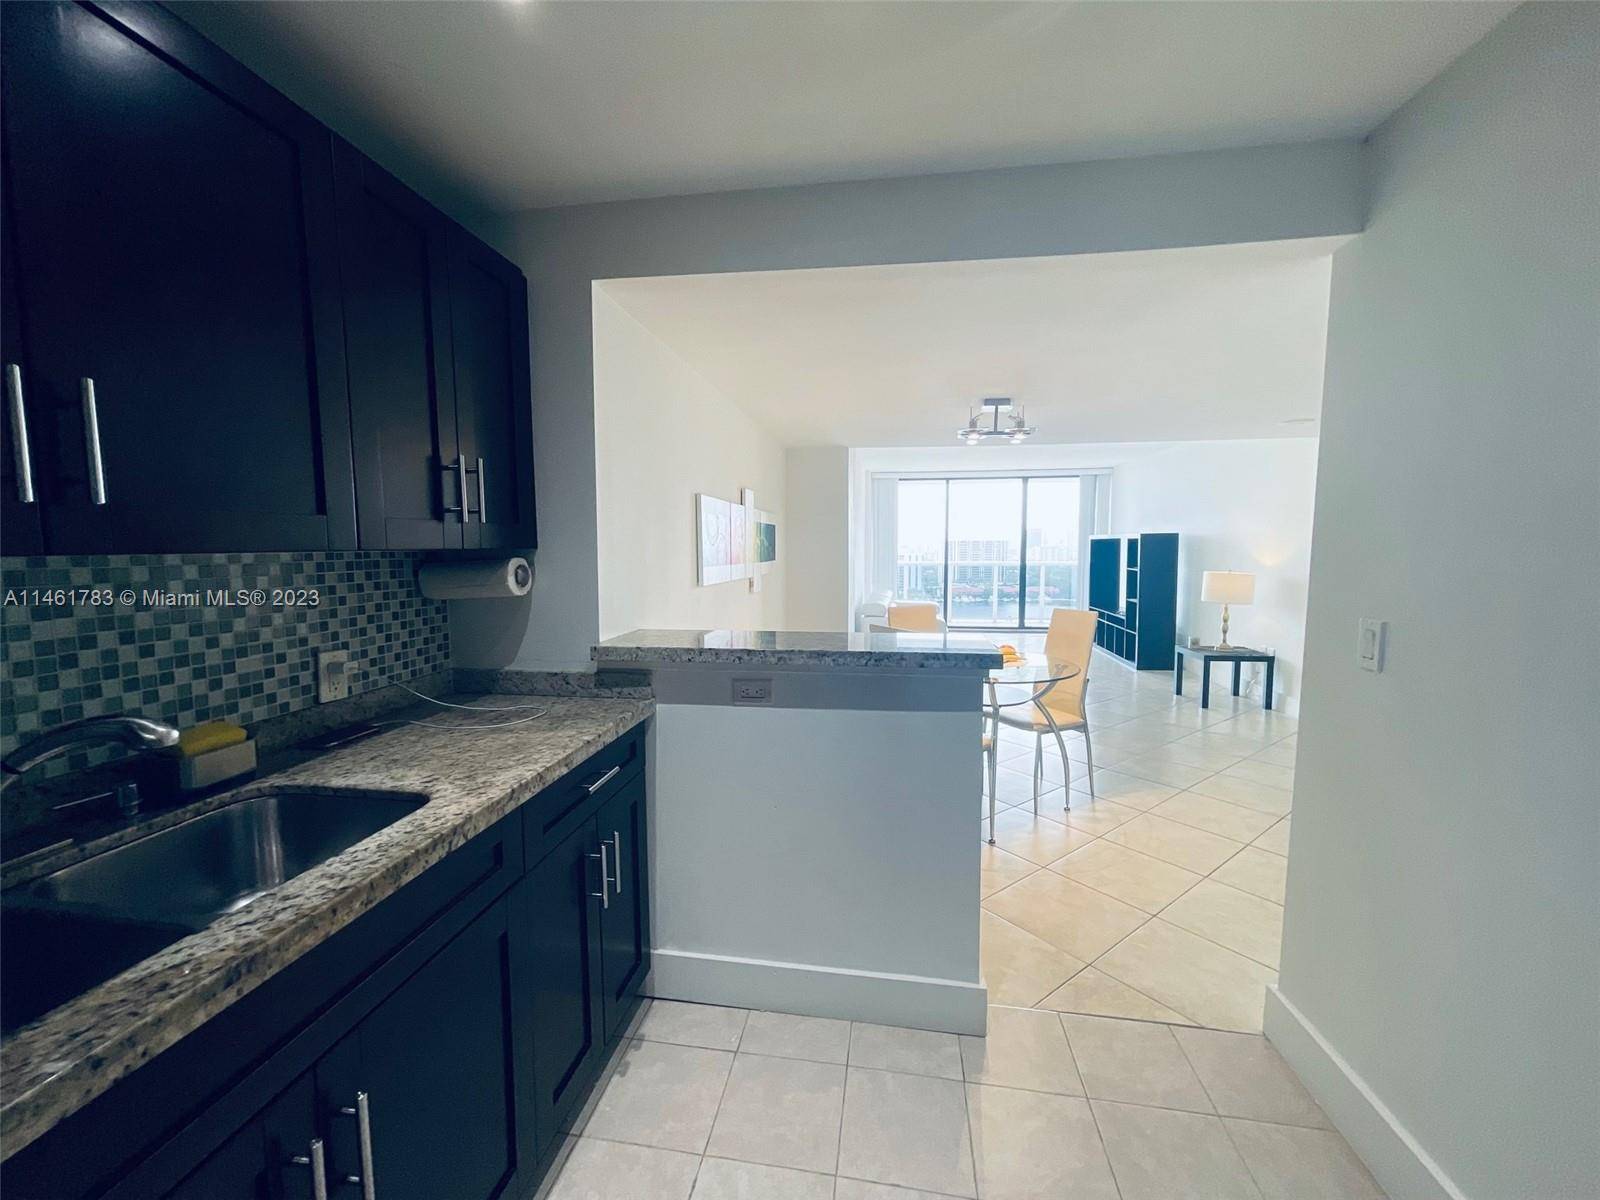 MILLION DOLLAR VIEW ! LOCATION LOCATION LOCATION BEAUTIFUL UNIT LOCATED IN THE HEART OF AVENTURA 2 FULL BEDROOM AND 2 2 BATHS, BEAUTIFUL APT FULLY RENOVATED WITH STUNNING VIEW !